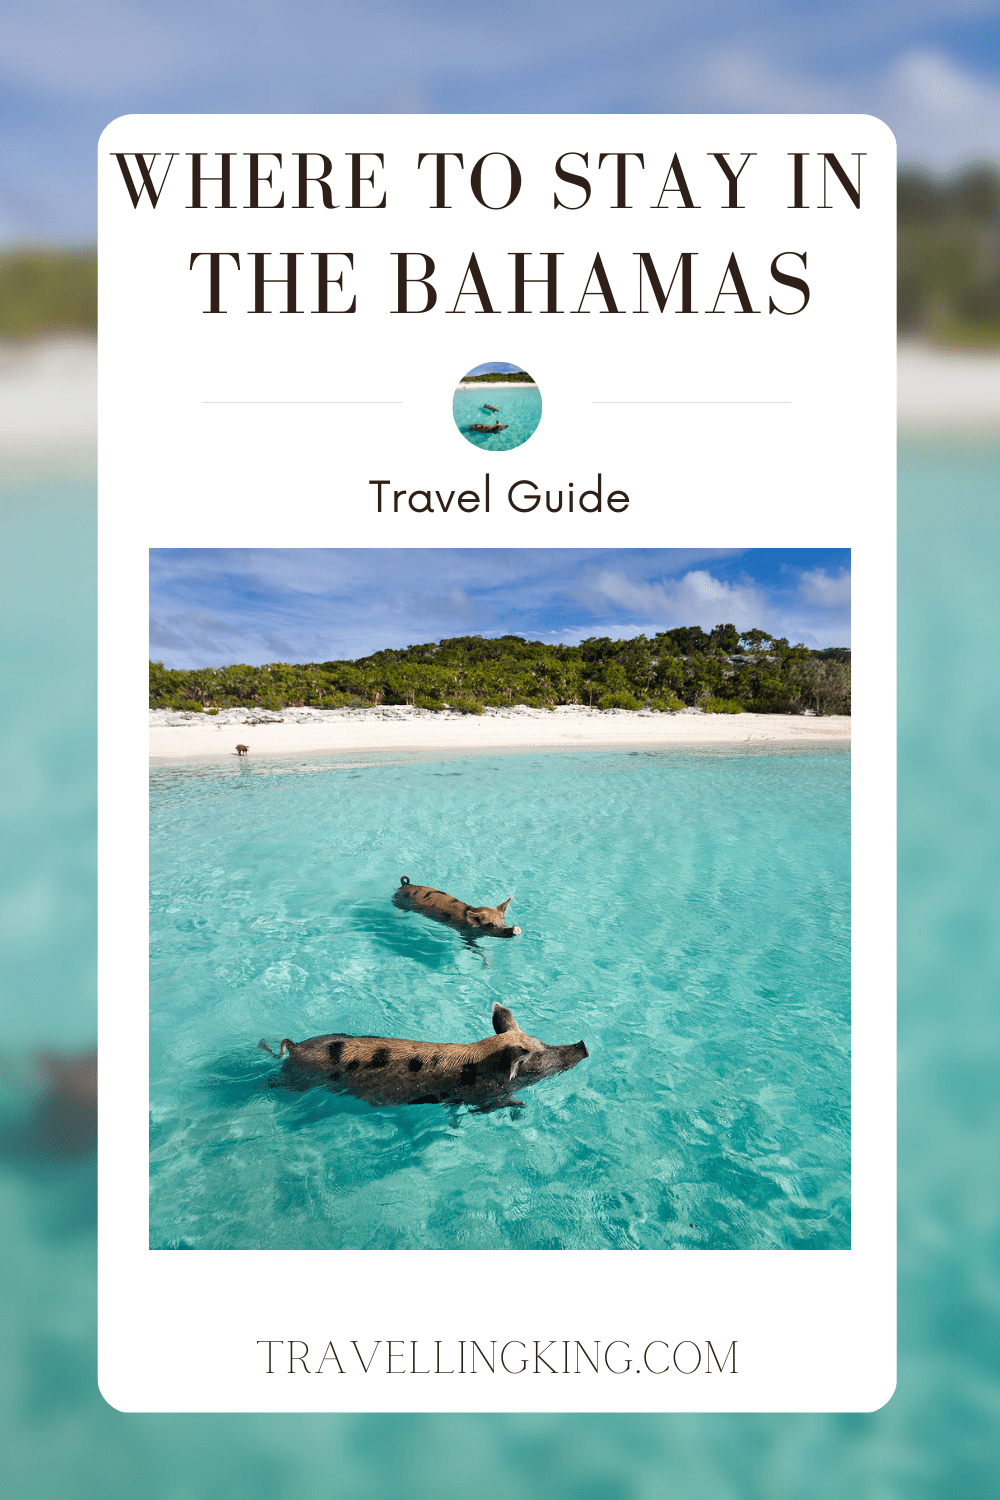 Where to stay in the Bahamas